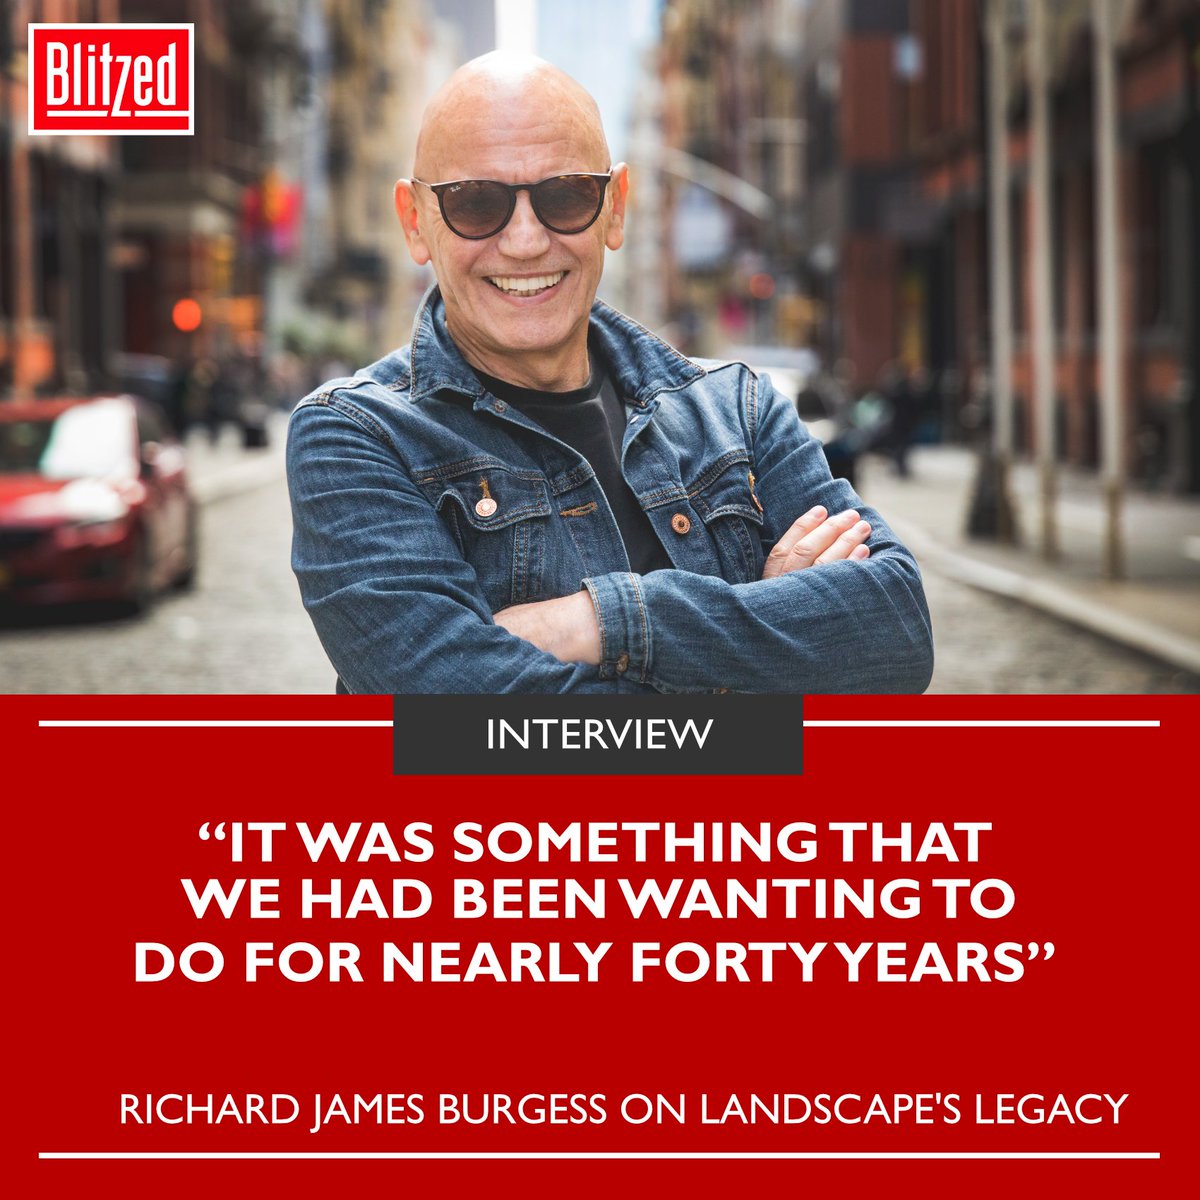 With the recent release of new anthlology 'Landscape A Go-Go', in the new Blitzed we speak to producer, musician and co-founder of @Landscape_band @richardjburgess on the band's legacy.🎹🖤 Subscribe to Blitzed today! 🔥 blitzedmag.com/subscribe/